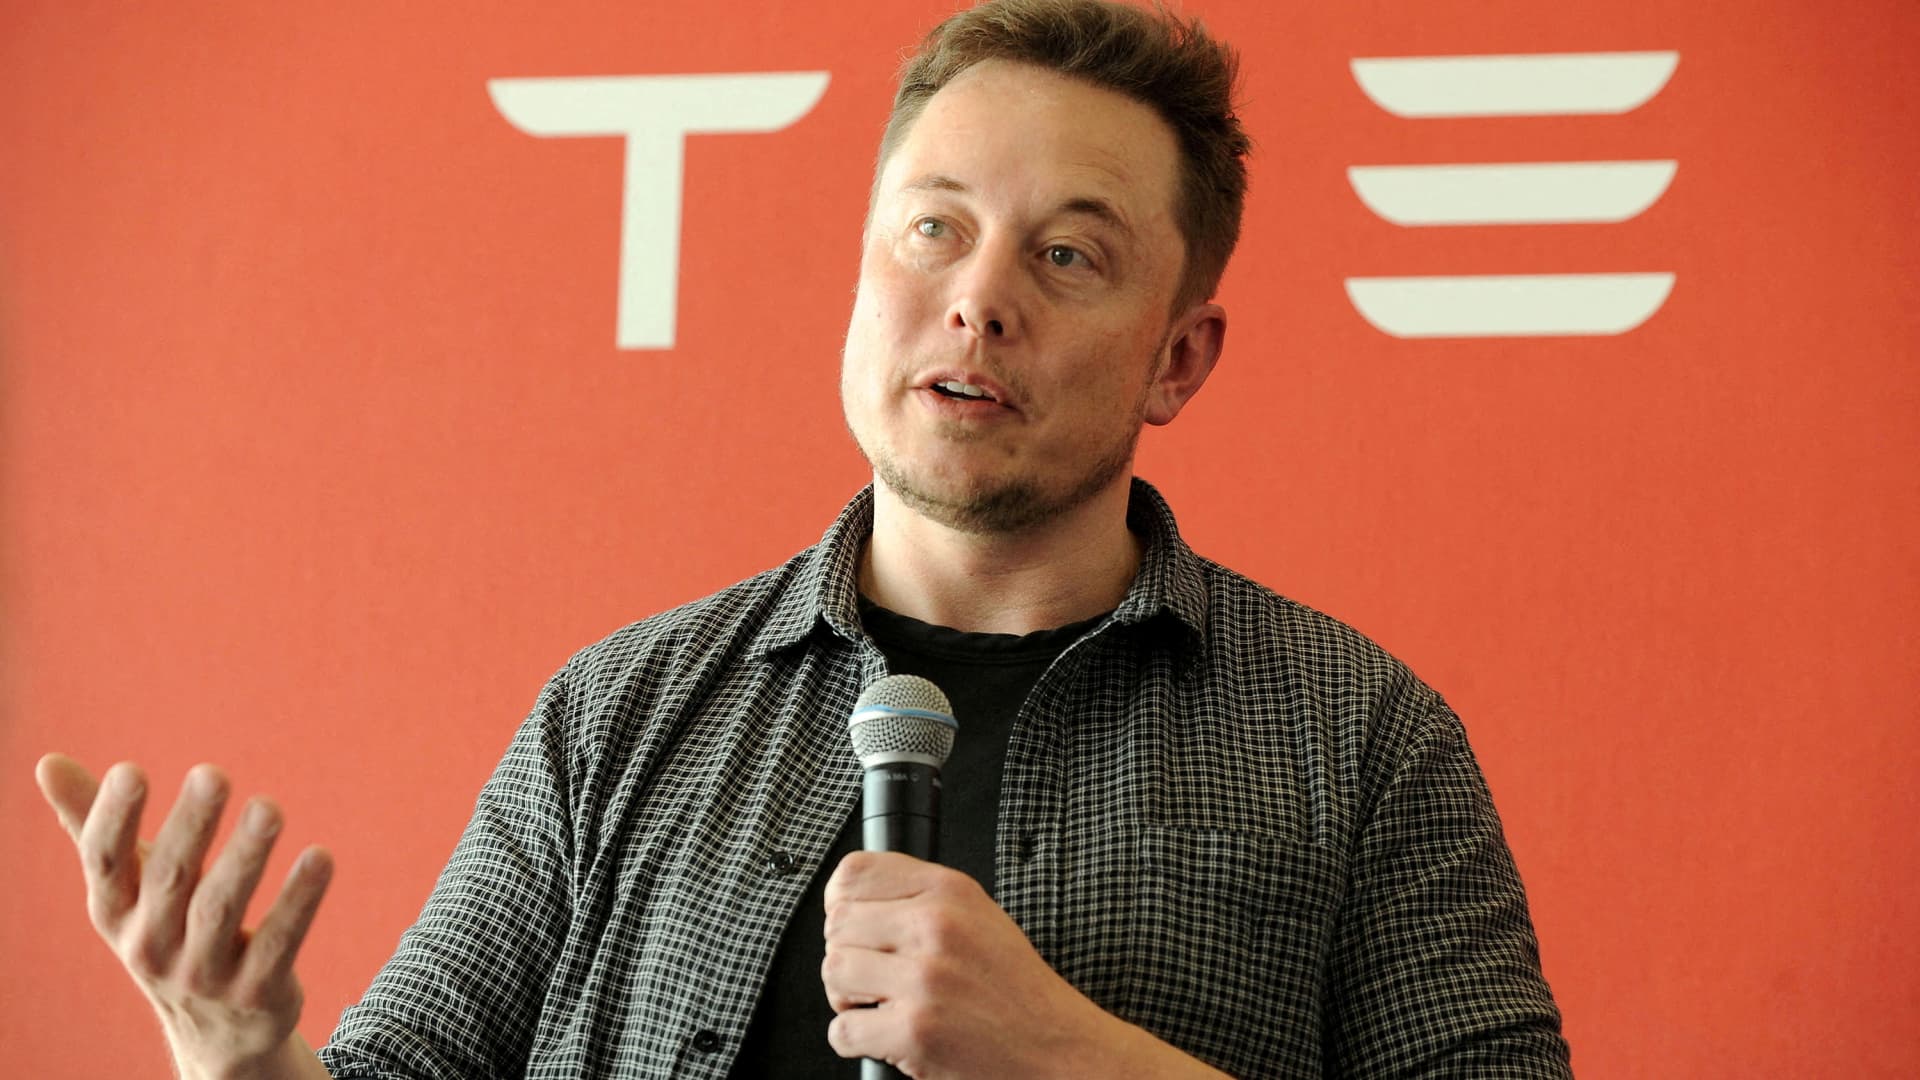 Tesla CEO Elon Musk is trying to buy Twitter and manage multiple companies at the same time.